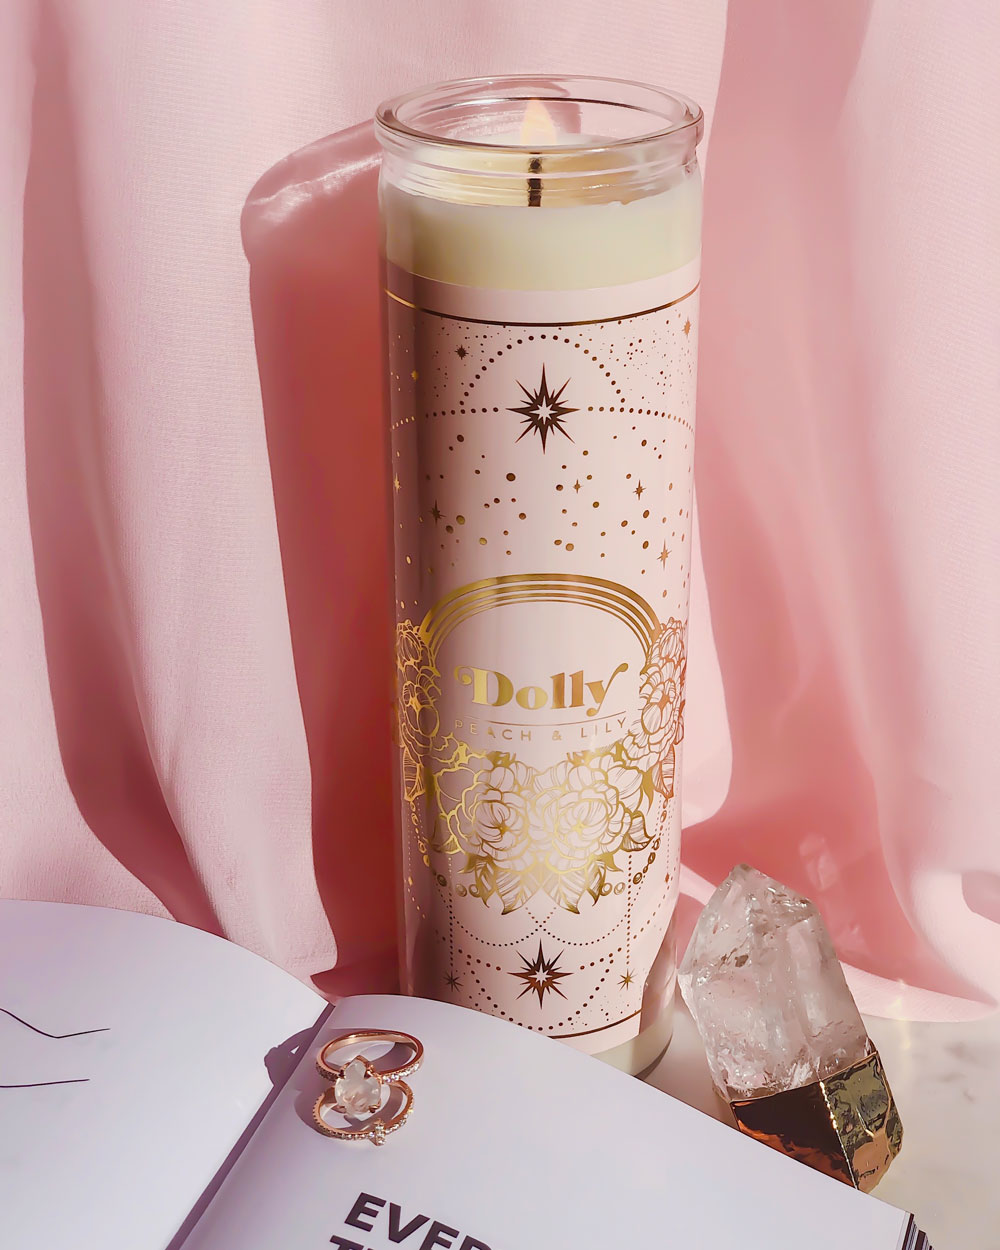 Dolly • Peach & Lily Tall Candle